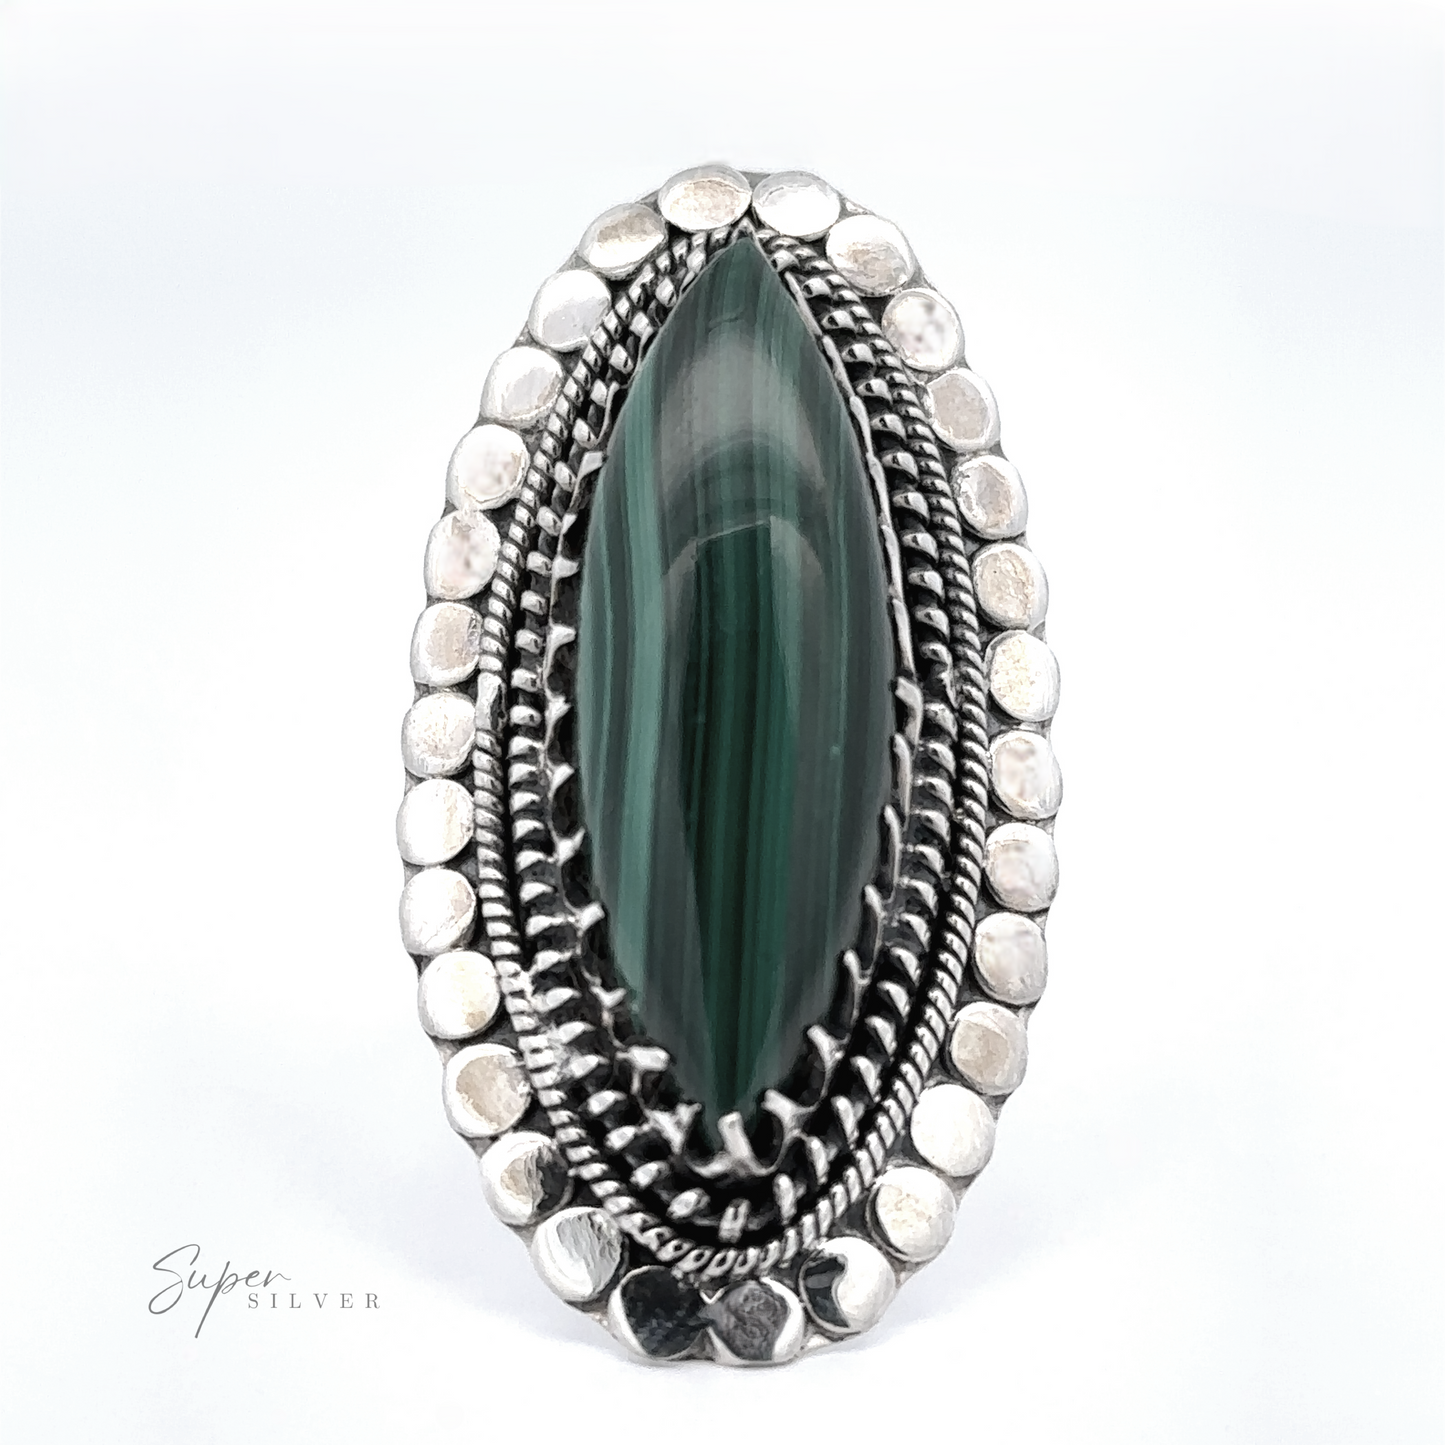 
                  
                    Oval-shaped silver ring with a large, green stone in the center, surrounded by multiple layers of detailed silverwork. The brand name "Super Silver" appears in small text at the bottom left. This exquisite piece is a perfect example of bohemian jewelry at its finest.

Statement Marquise Shaped Gemstone Ring
                  
                